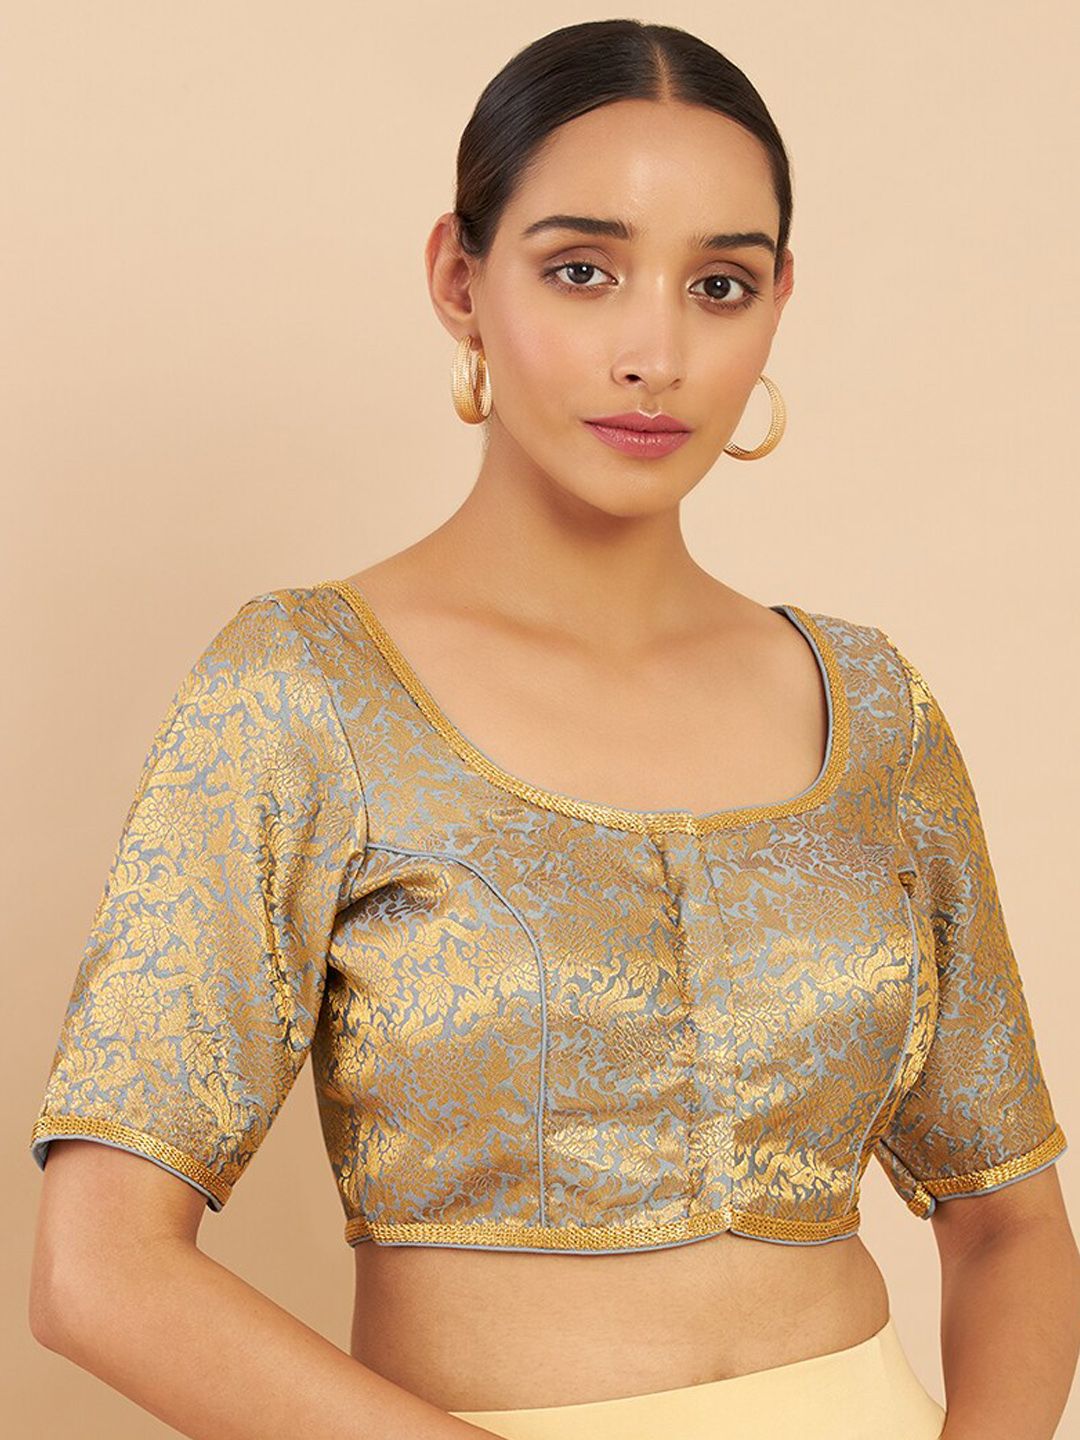 Soch Grey Printed Blouse With Brocade Weaving Price in India